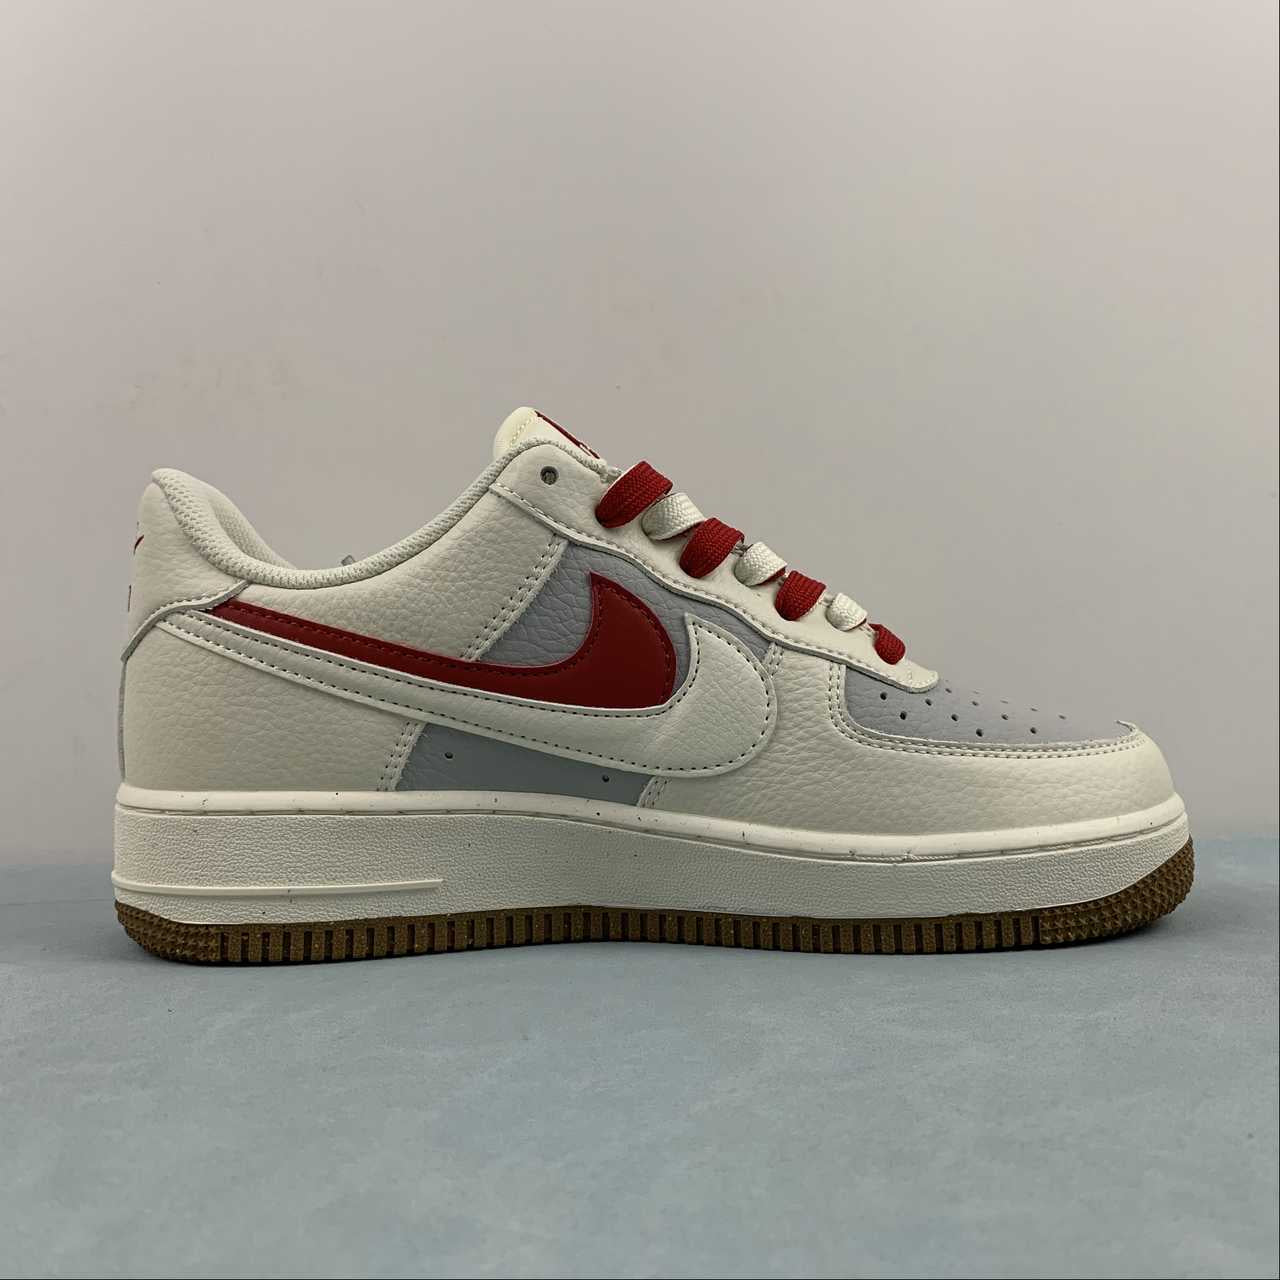 Nike airforce A1 grey red shoes